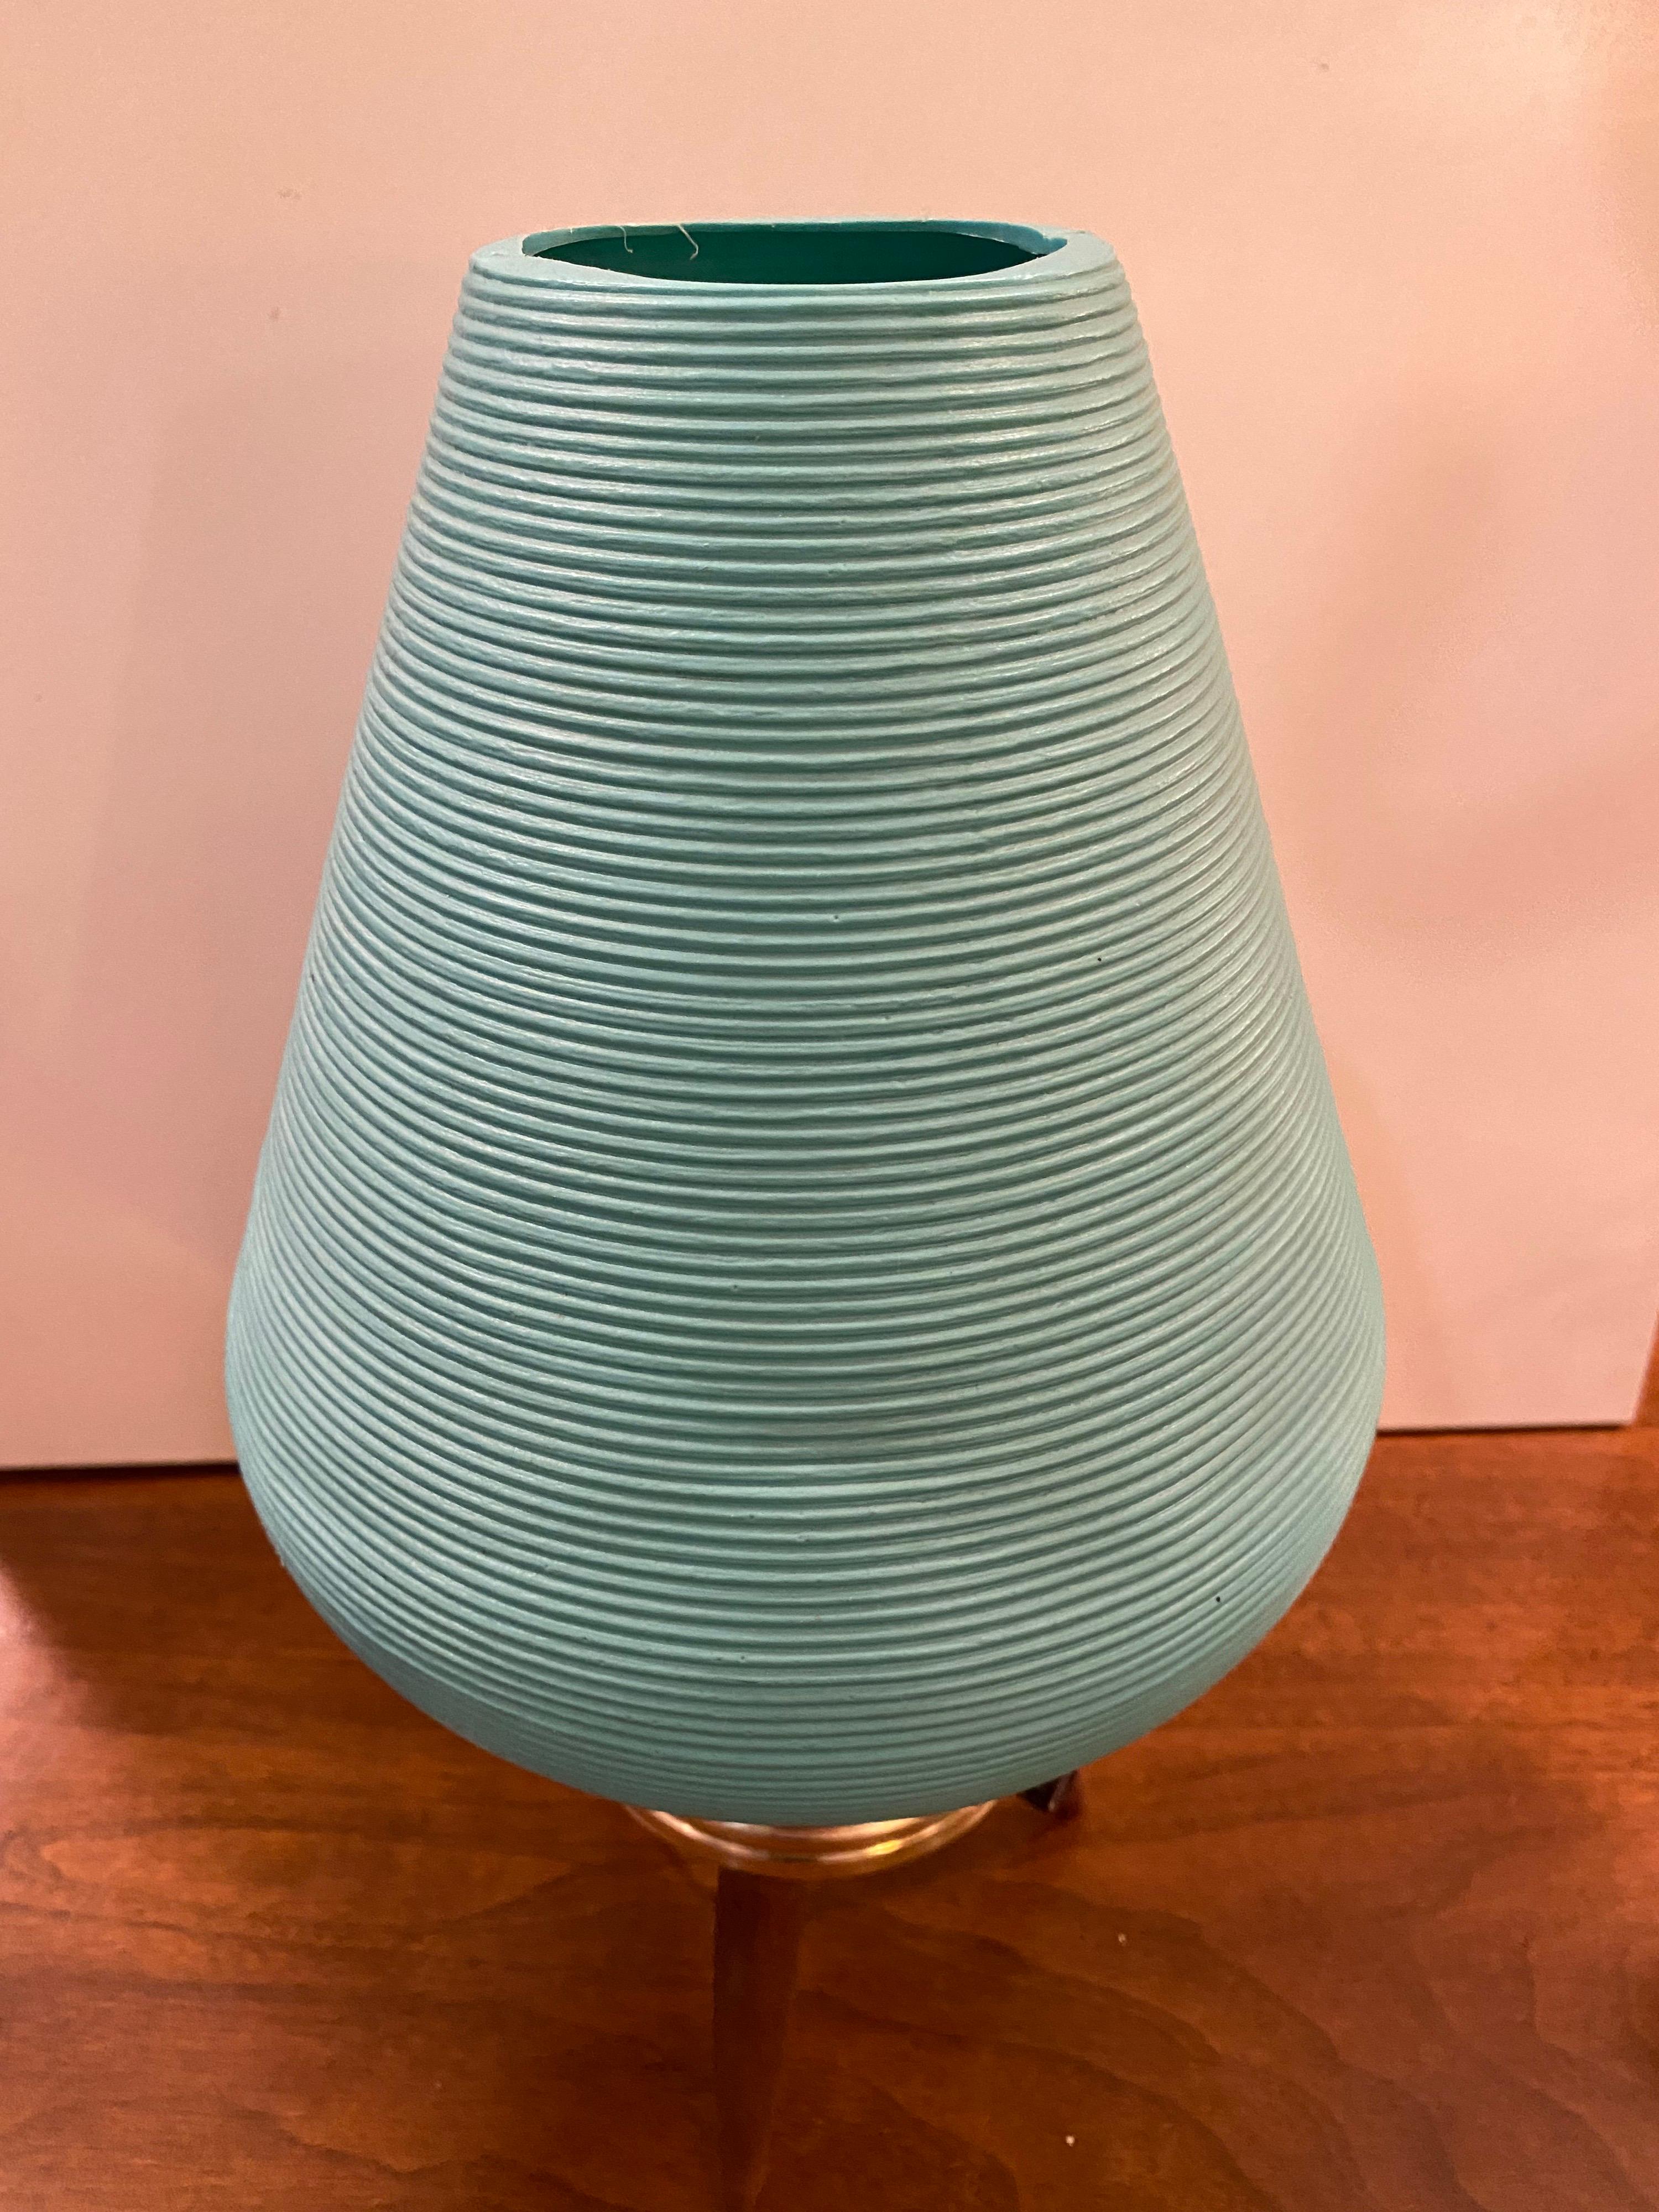 Small plastic beehive table lamp with a metal body and 3 wood legs forming a tripod base. Turn switch coming out of metal frame adds ease to turning this aqua-blue lamp on!